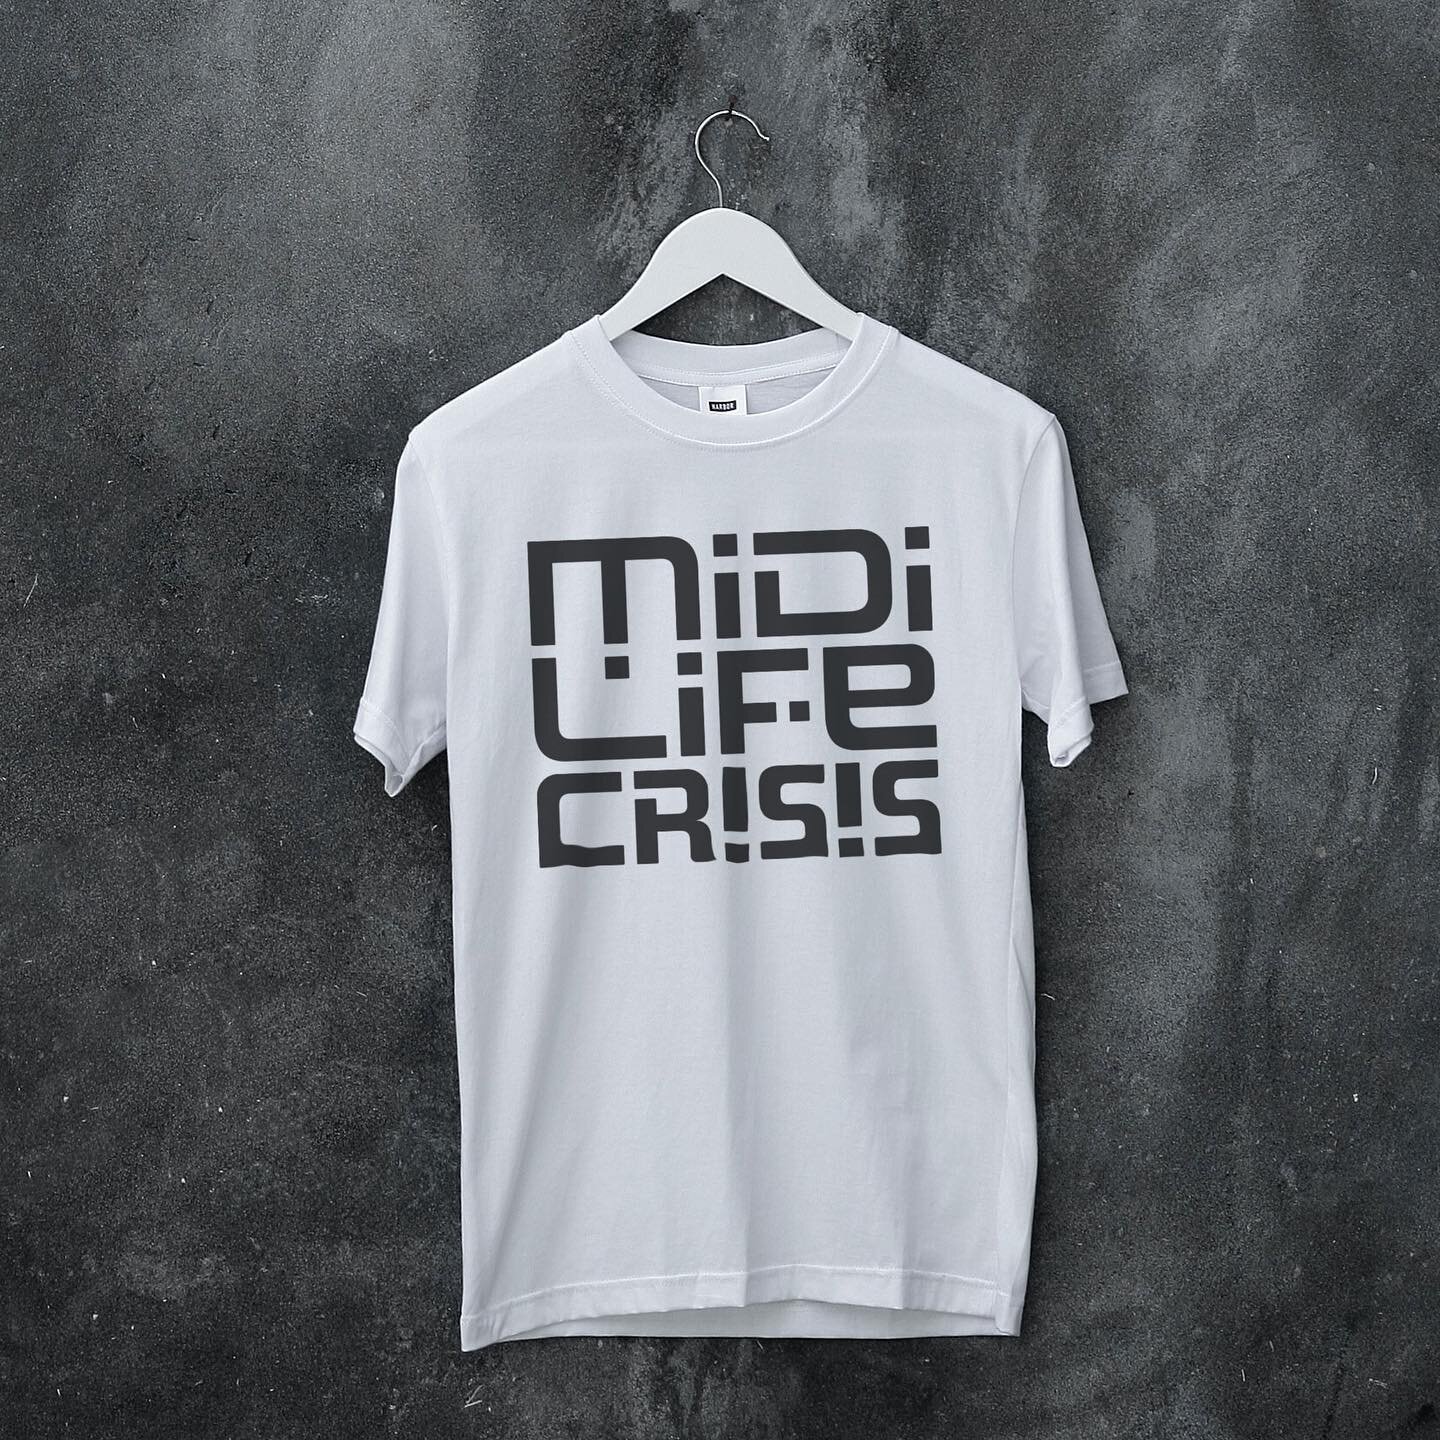 New merch! It comes for us all. Let it sync in. Get yours via our bio link or at MonsterPlanet.TV. #midilifecrisis #merch